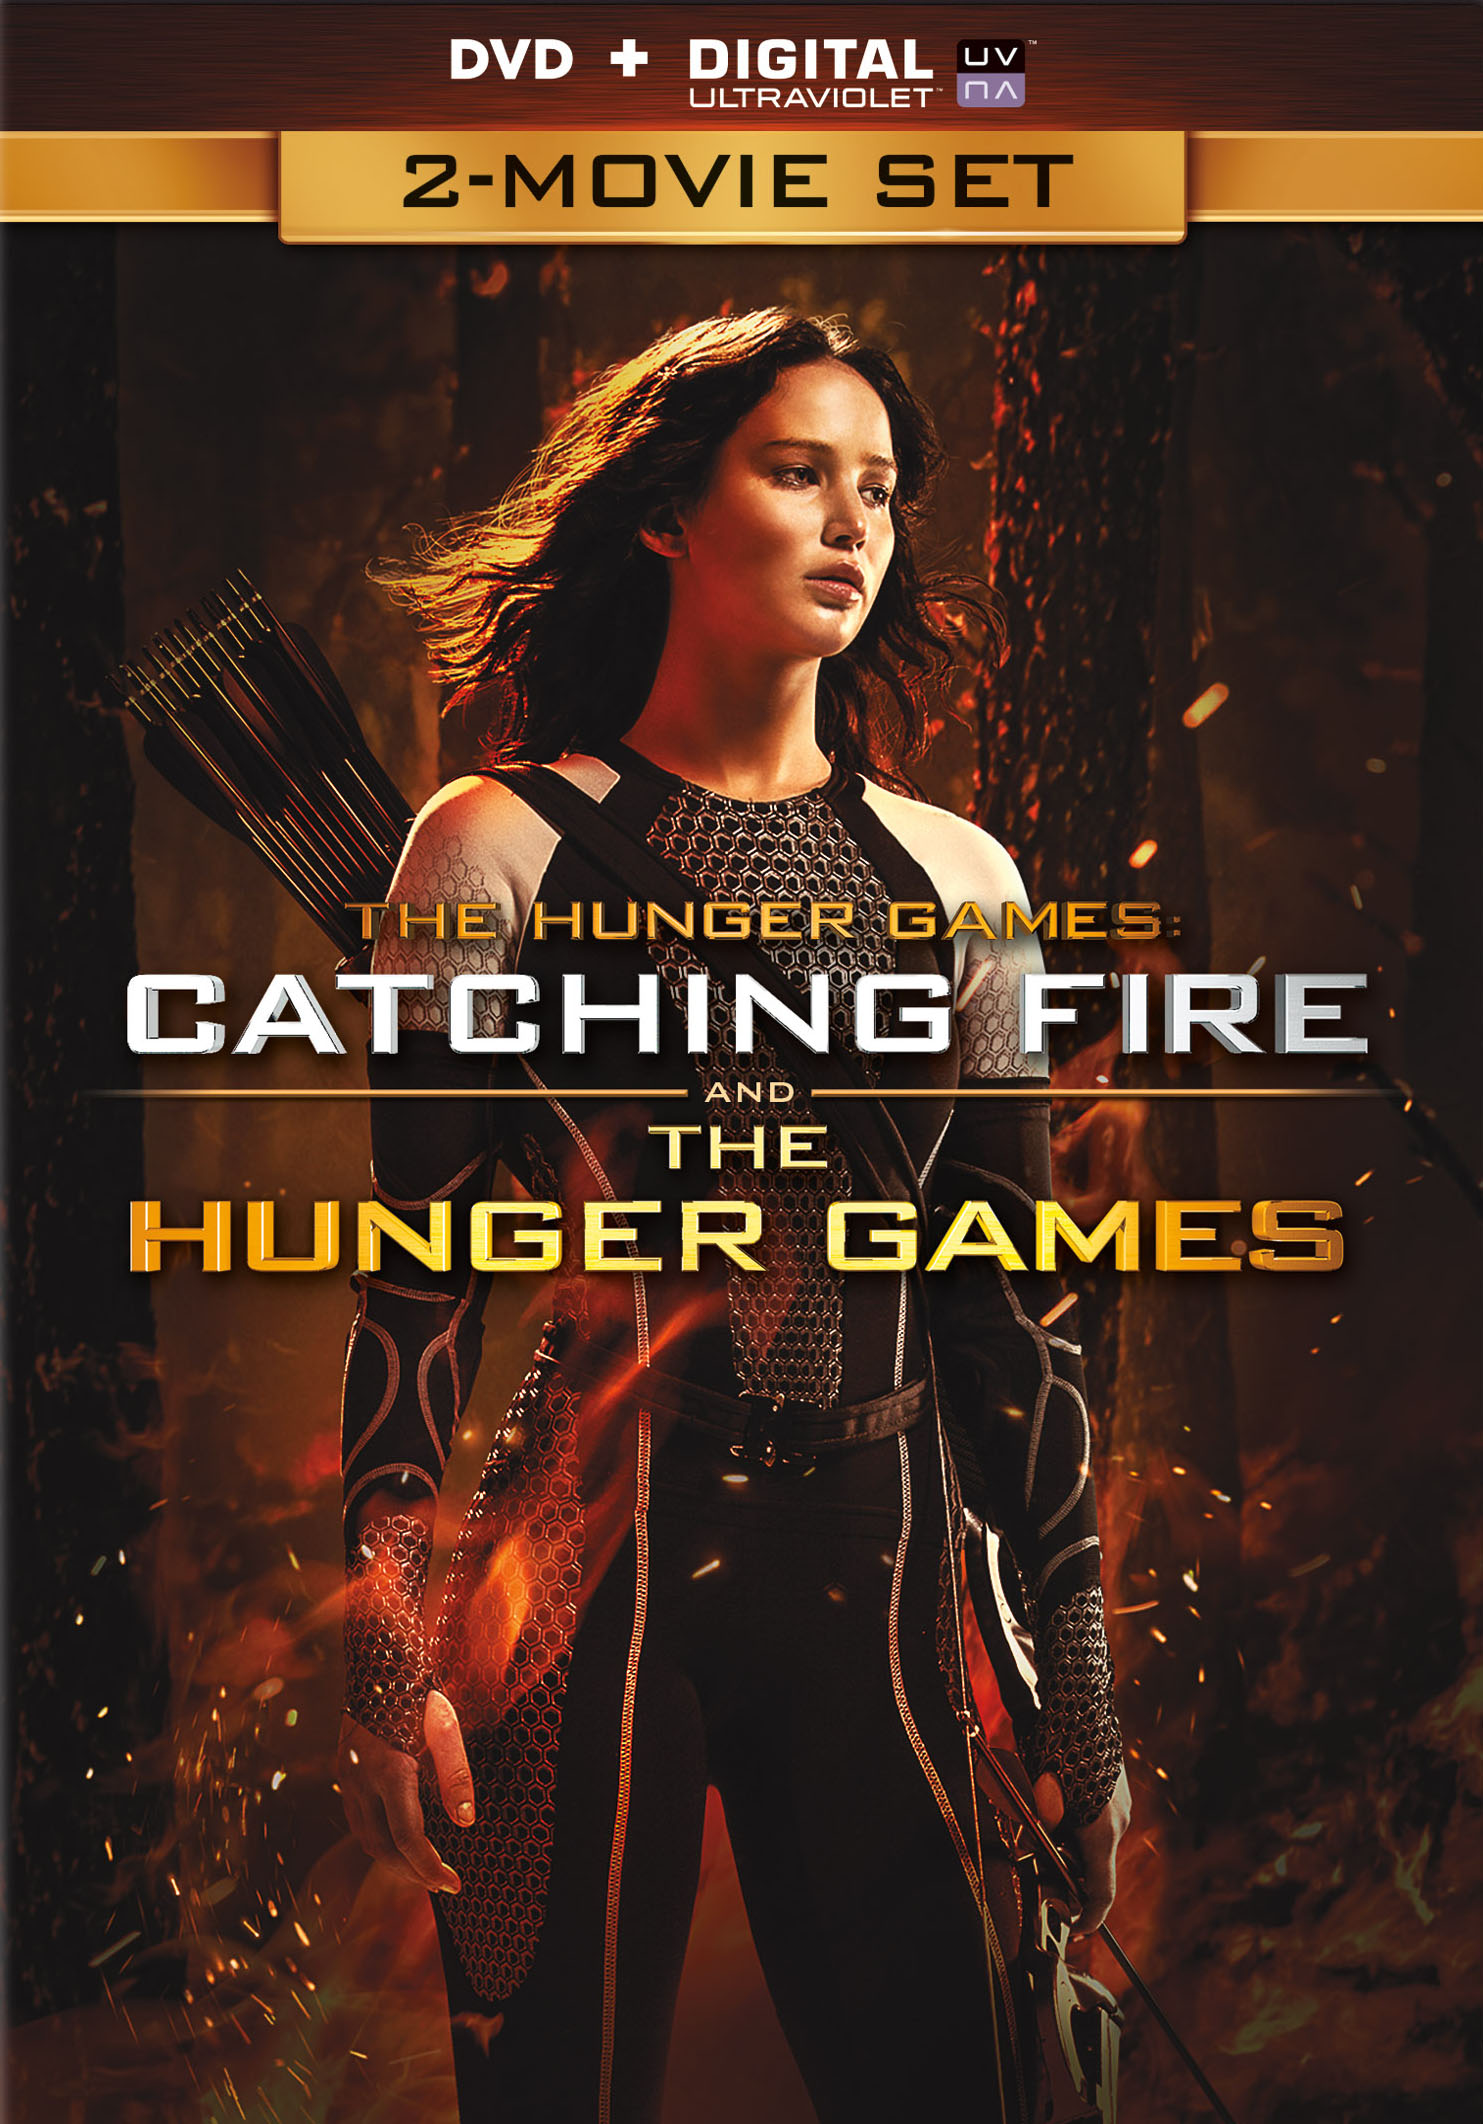 The Hunger Games and Catching Fire Double Feature: A Review in